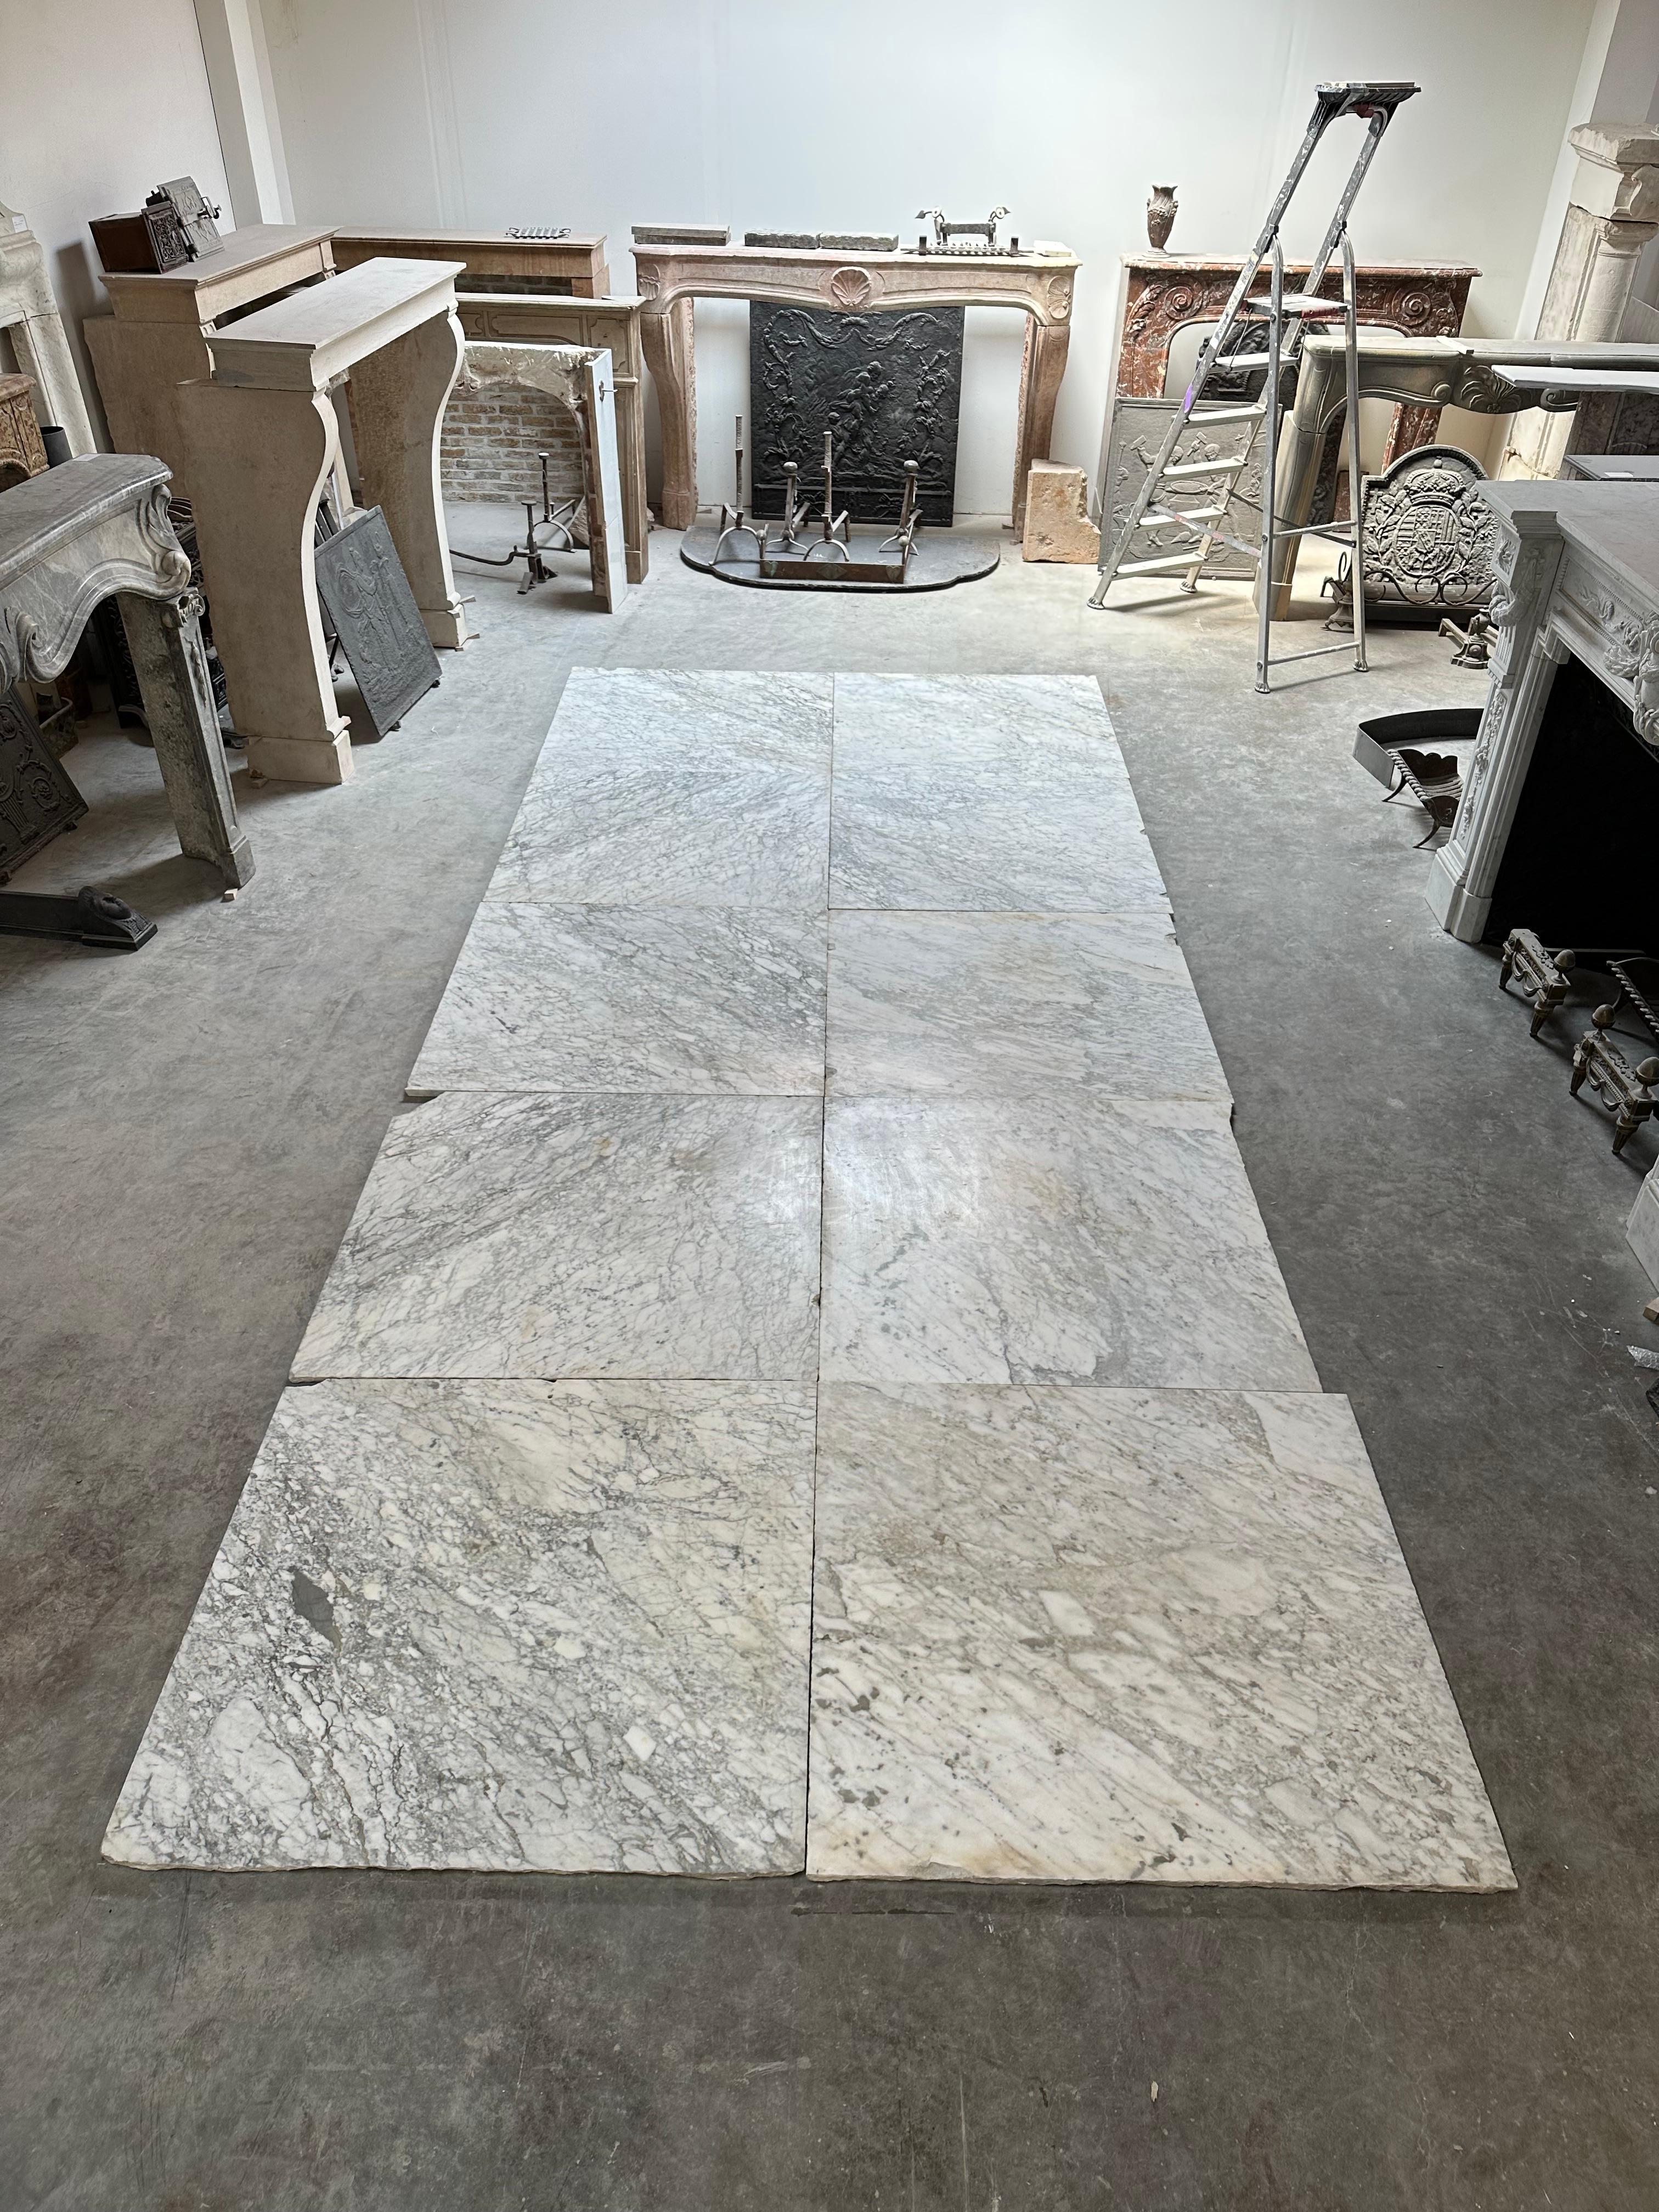 Very please to offer this beautiful Arabescato marble floor.
This used to be the hallway in a late 19th century hallway in the city center of Amsterdam. The floor dates back to approx. 1870.

This Arabescato marble has a beautiful white font with